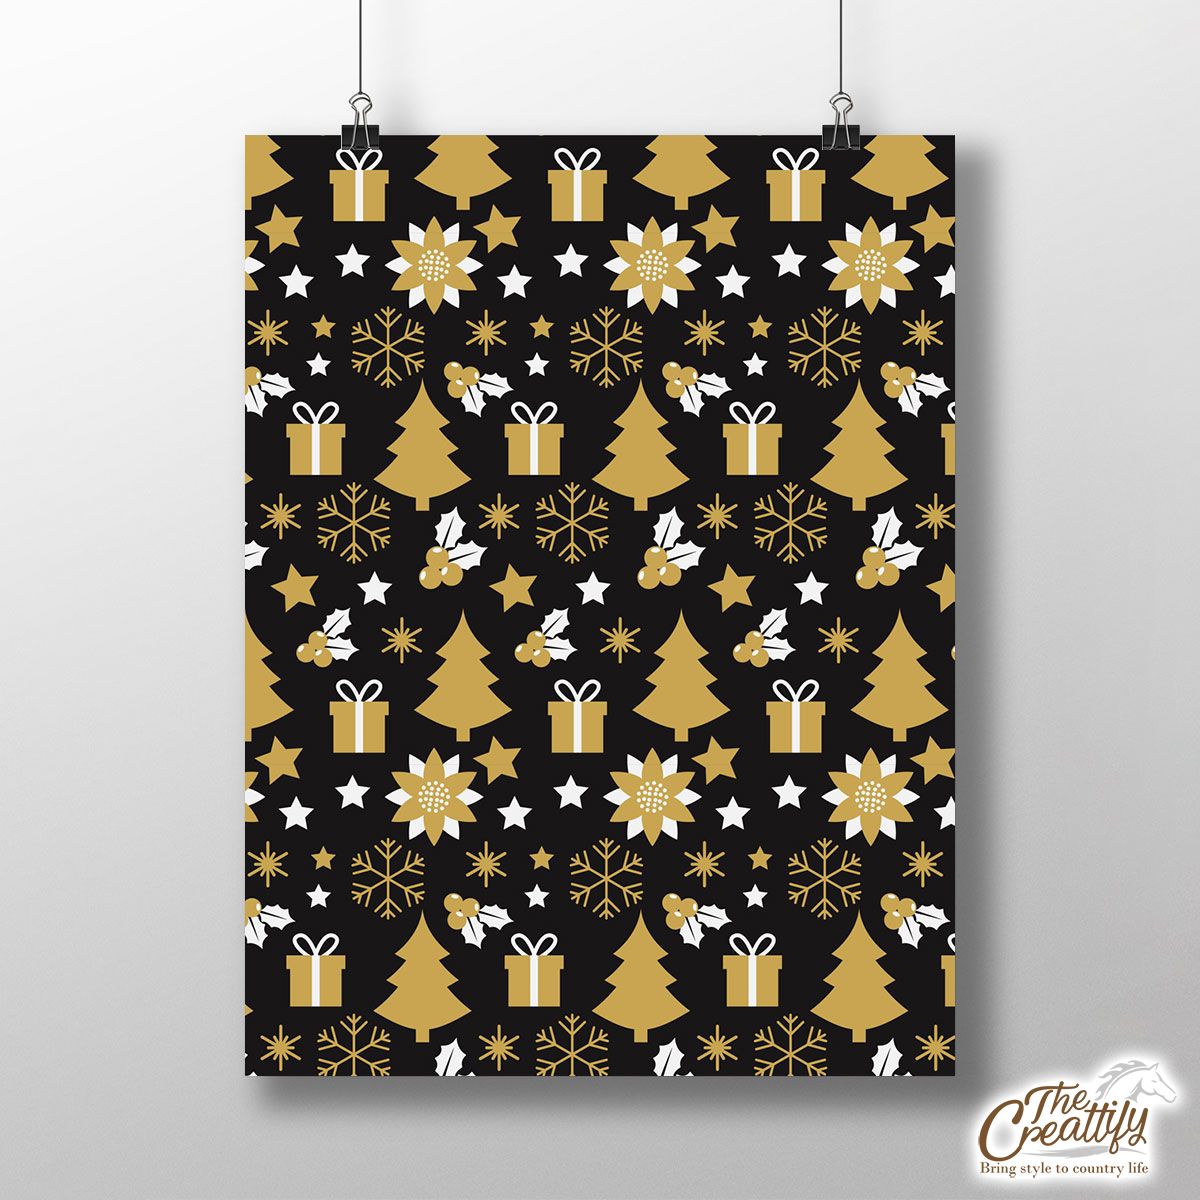 White And Gold Christmas Gift, Christmas Tree, Snowflake On Black Background Poster